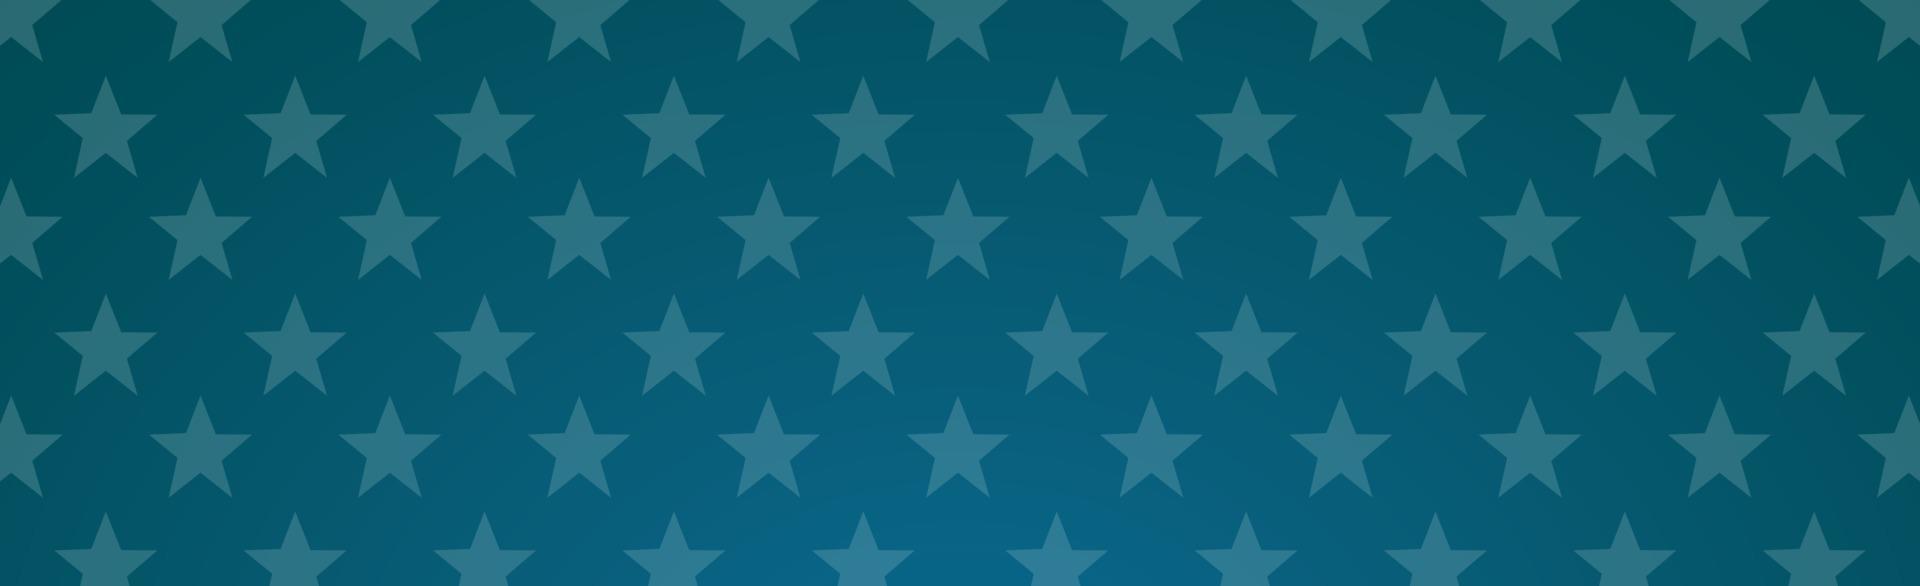 Abstract background with many stars American theme vector